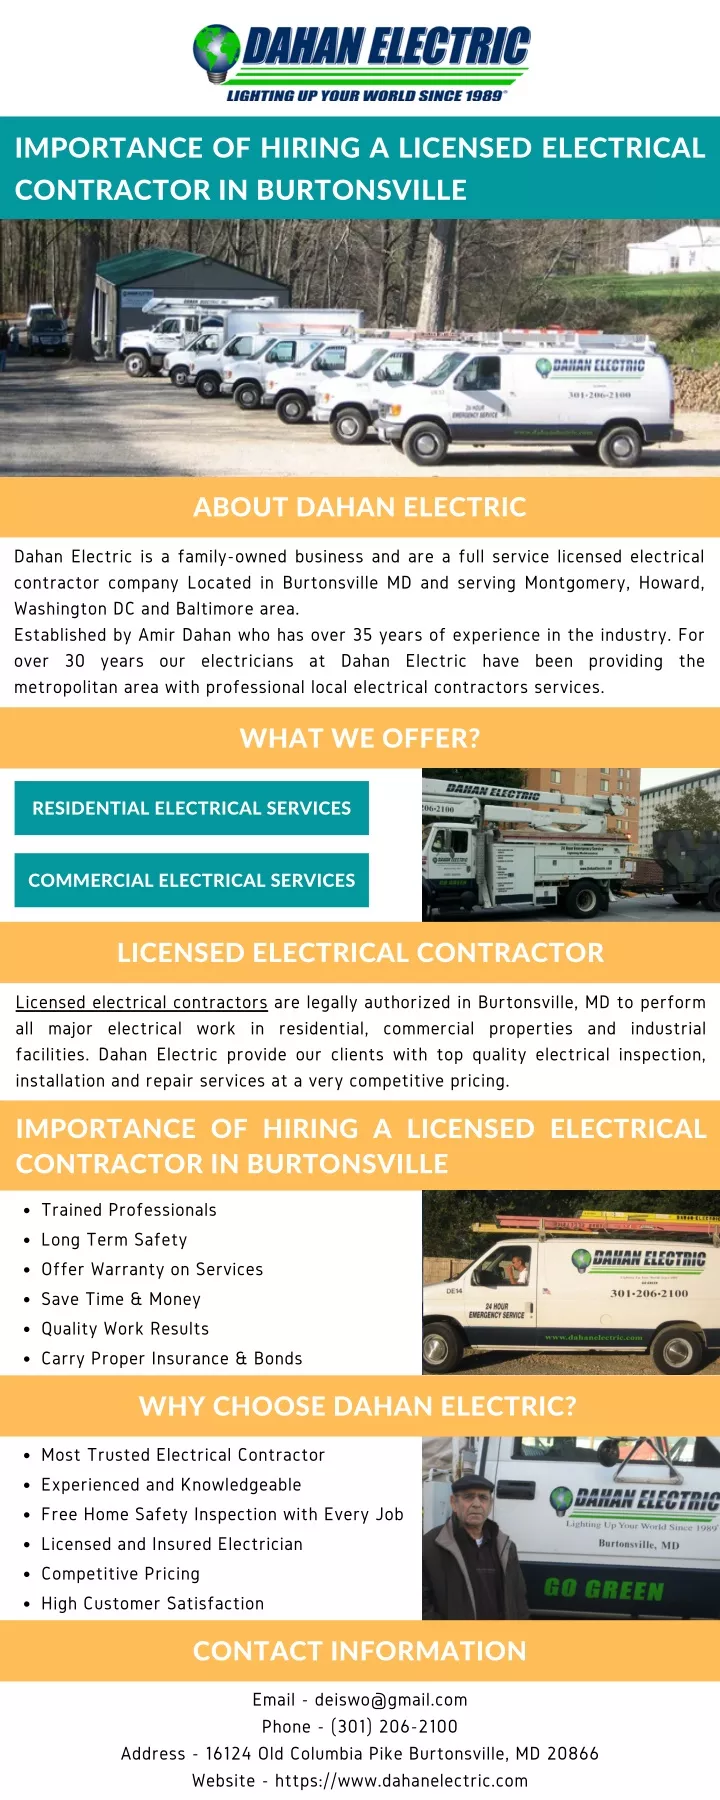 importance of hiring a licensed electrical